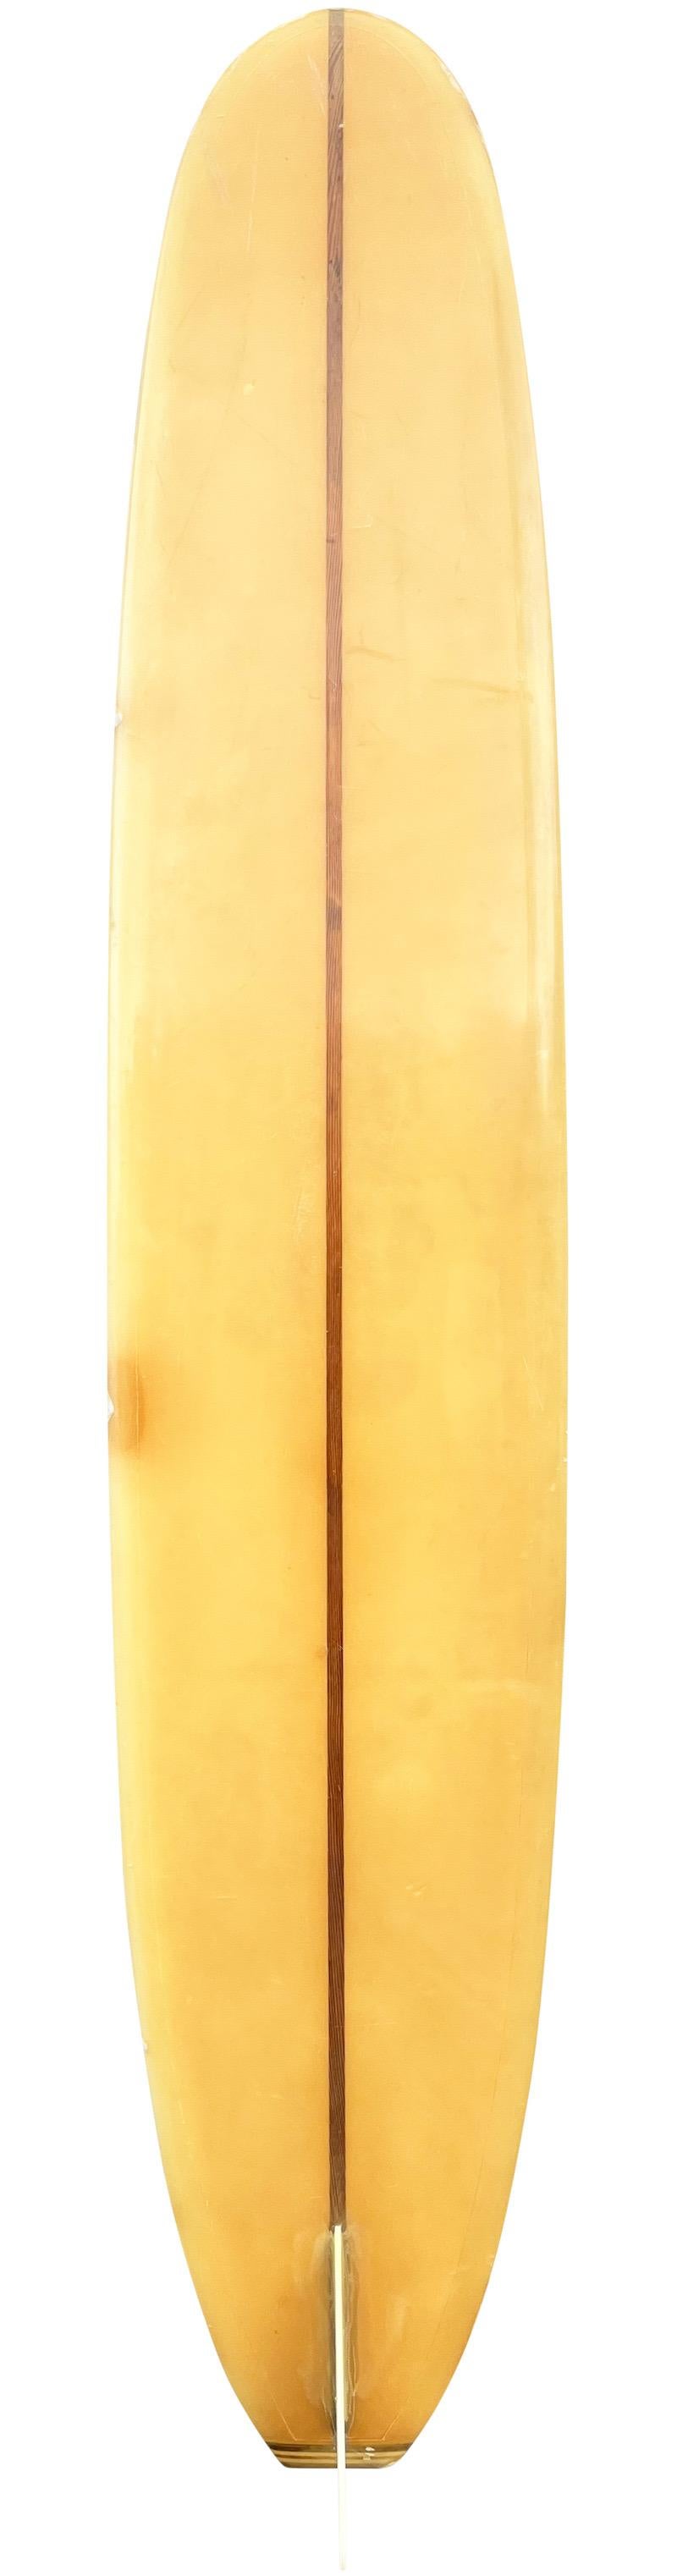 Mid-1960s Hobie Surfboards longboard. Features beautiful red panels with redwood stringer and fixed single fin. A gorgeous example of an all original classic 1960s longboard shaped under the iconic Hobie Surfboards label.